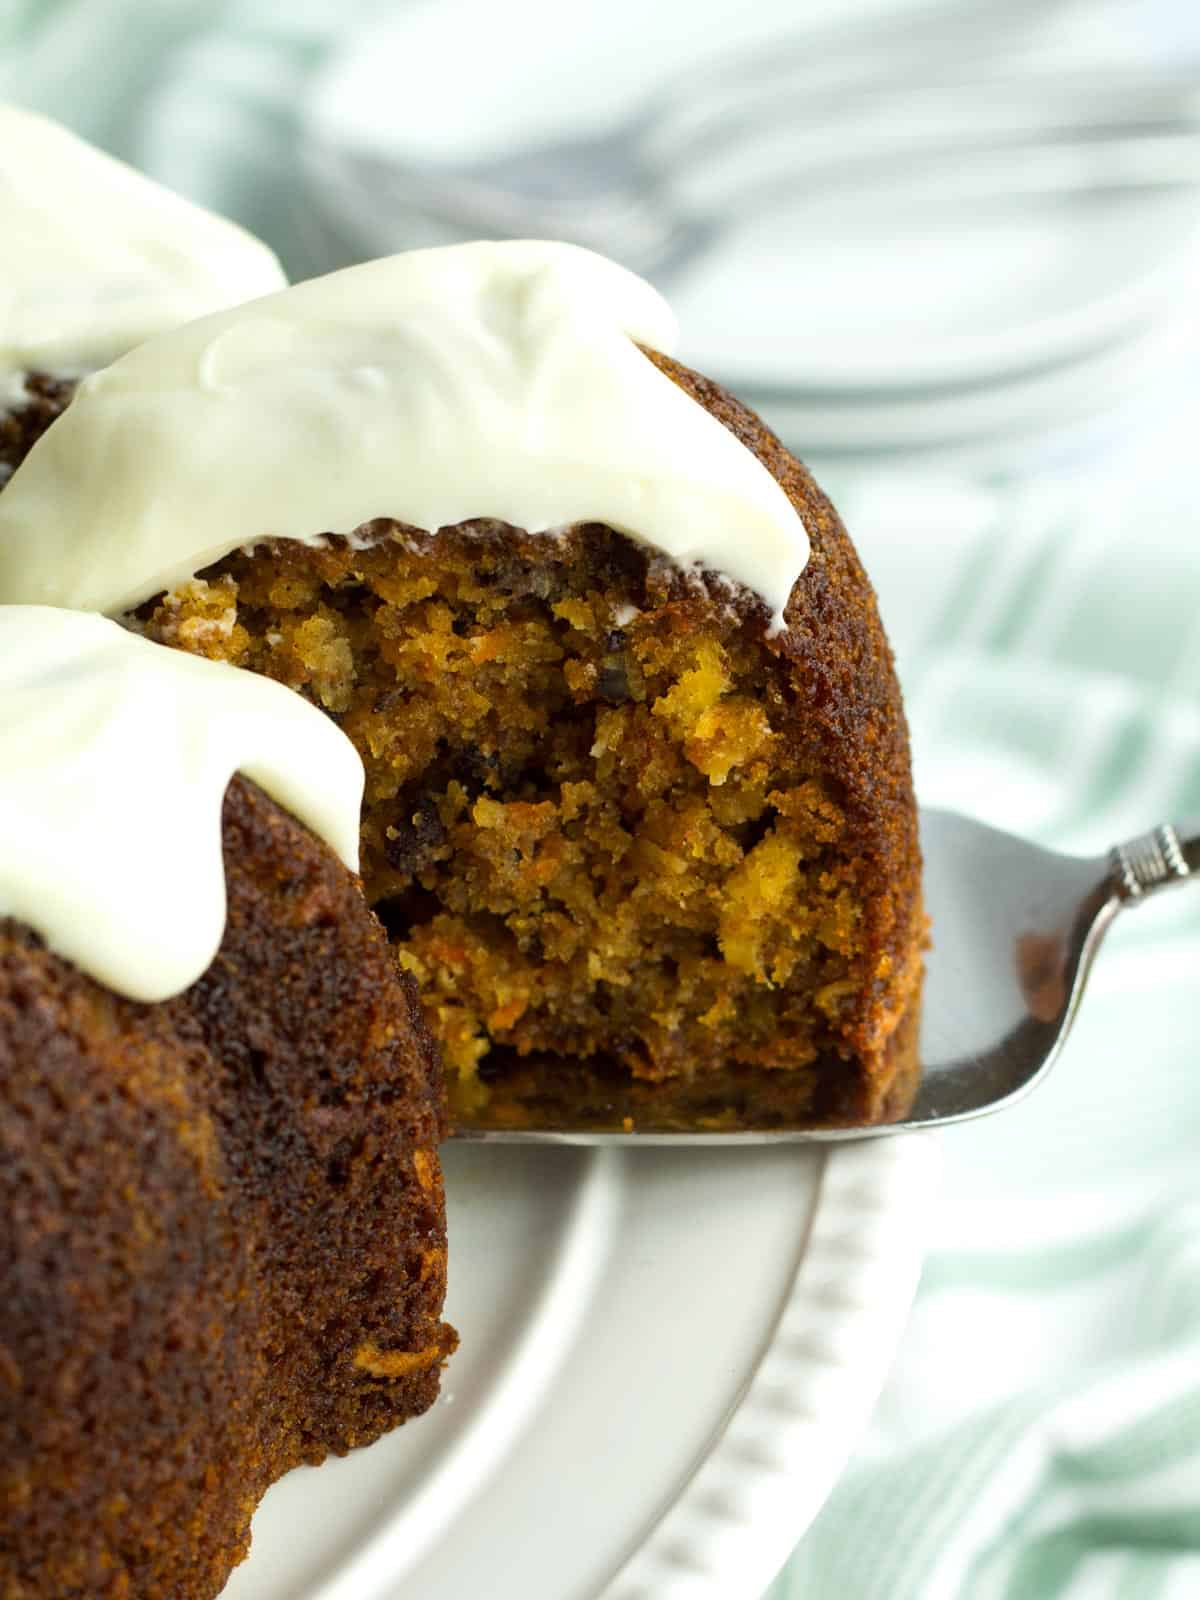 Light and fluffy cream cheese frosting on piece of carrot bundt cake with pineapple.